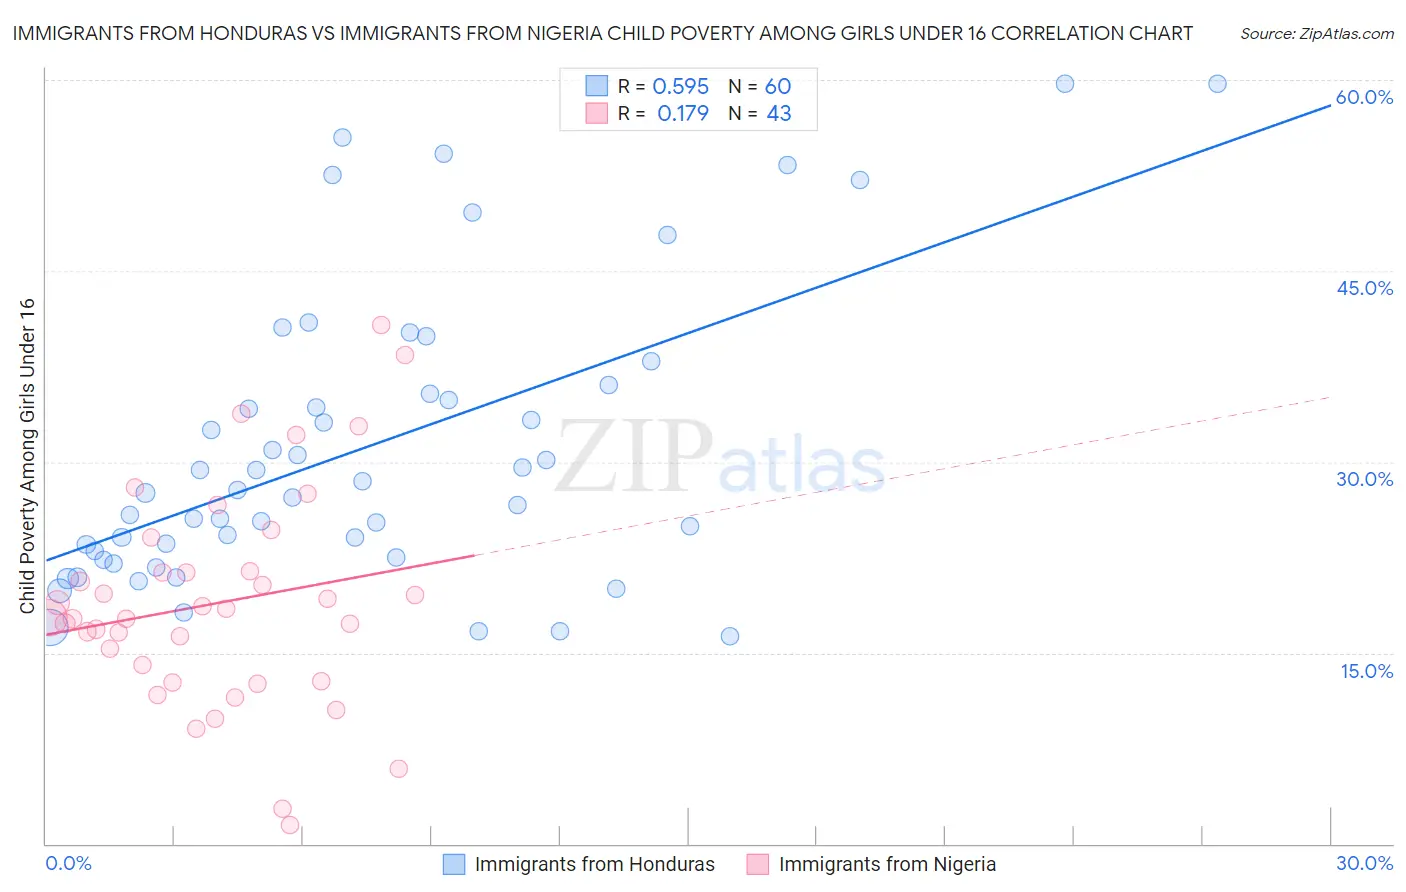 Immigrants from Honduras vs Immigrants from Nigeria Child Poverty Among Girls Under 16